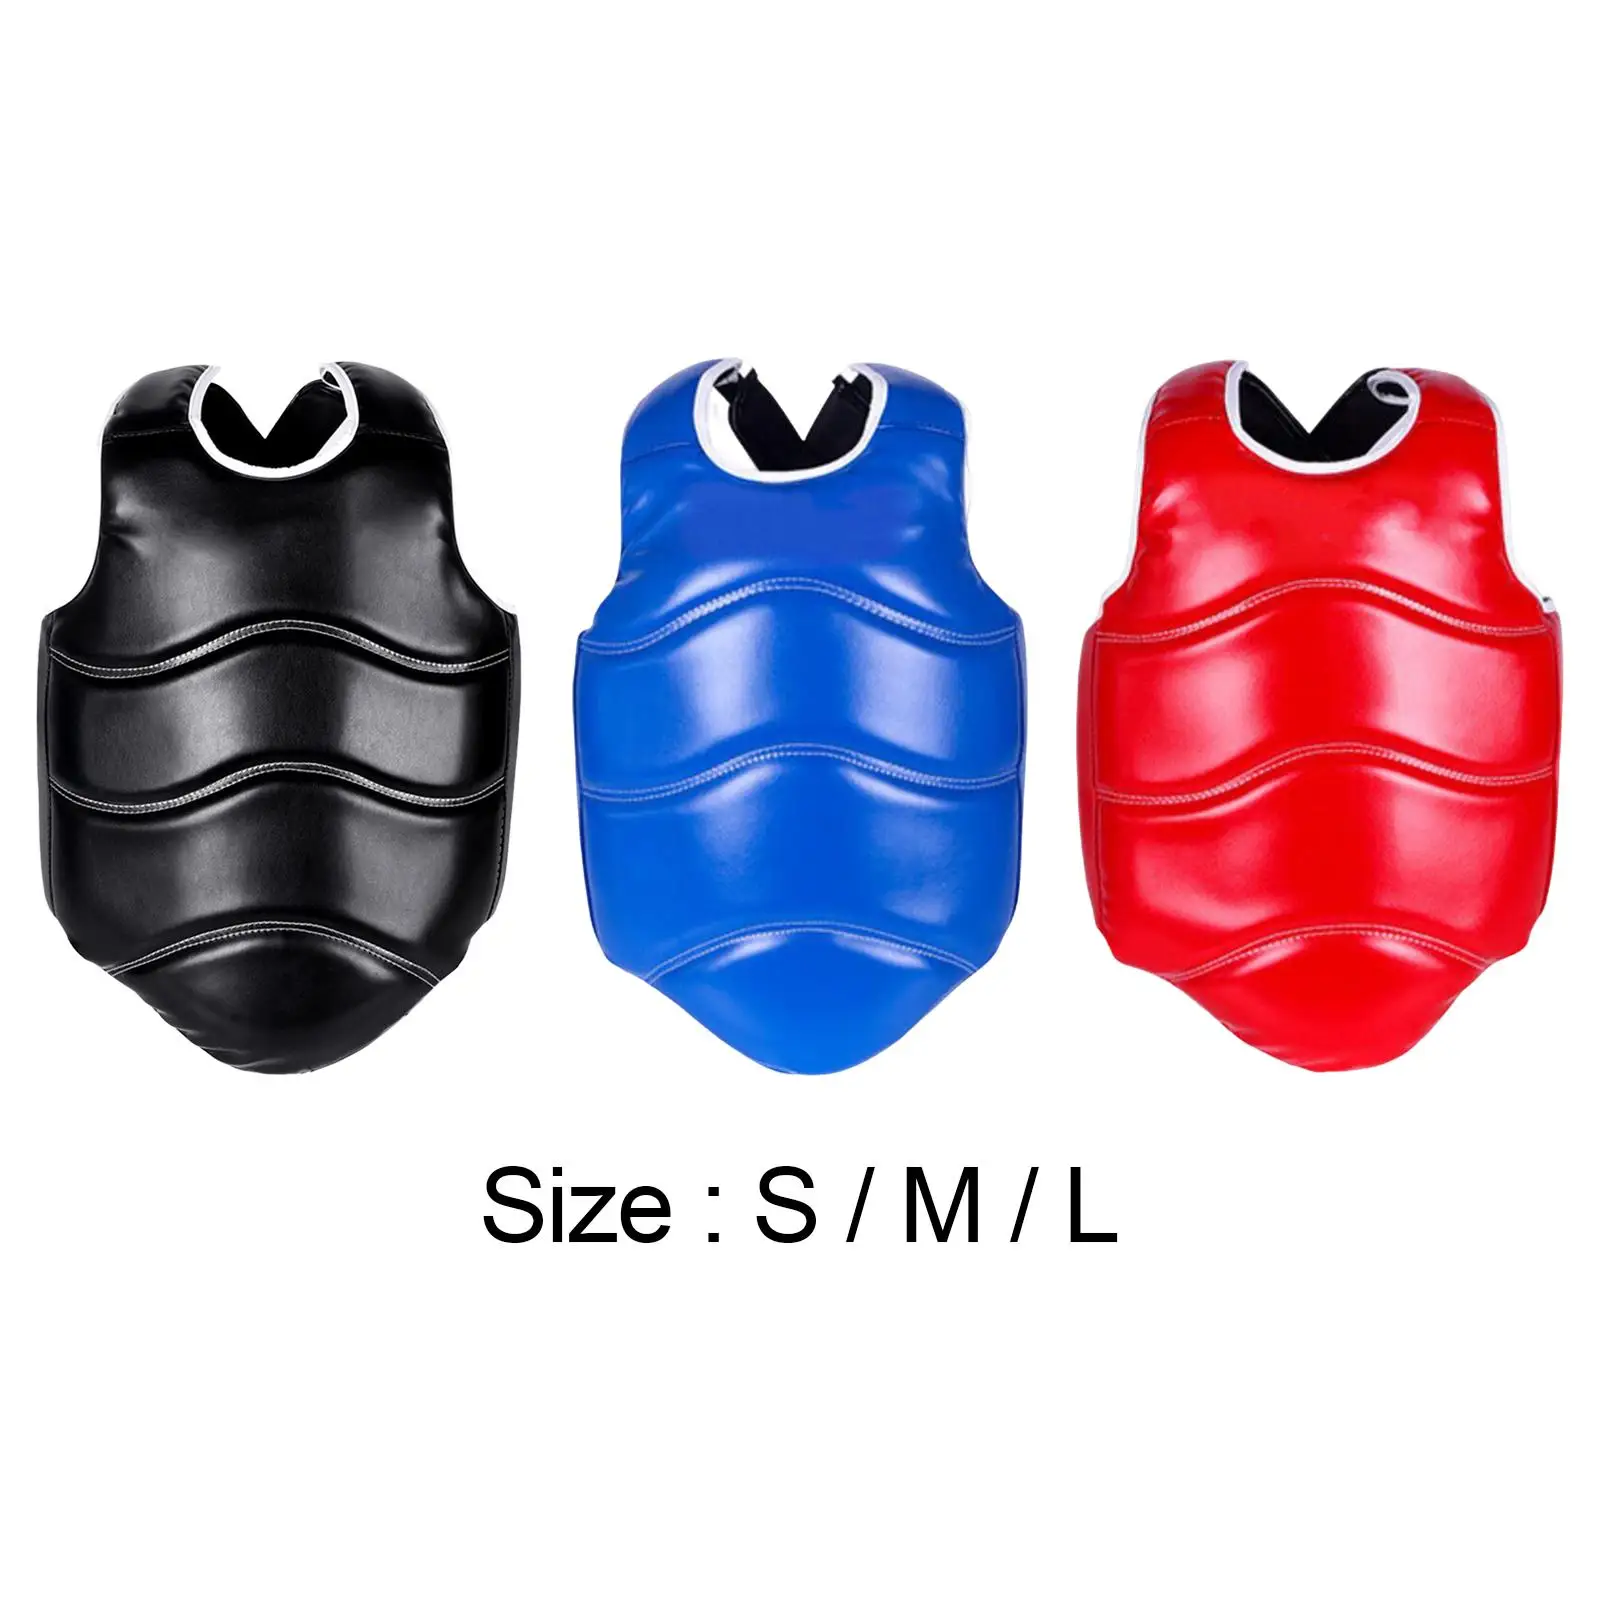 Karate Chest Protector Body Armor Vest Boxing Chest Guard Chest Gear Belly Ribs Protection Mma Taekwondo Unisex Kids Teen